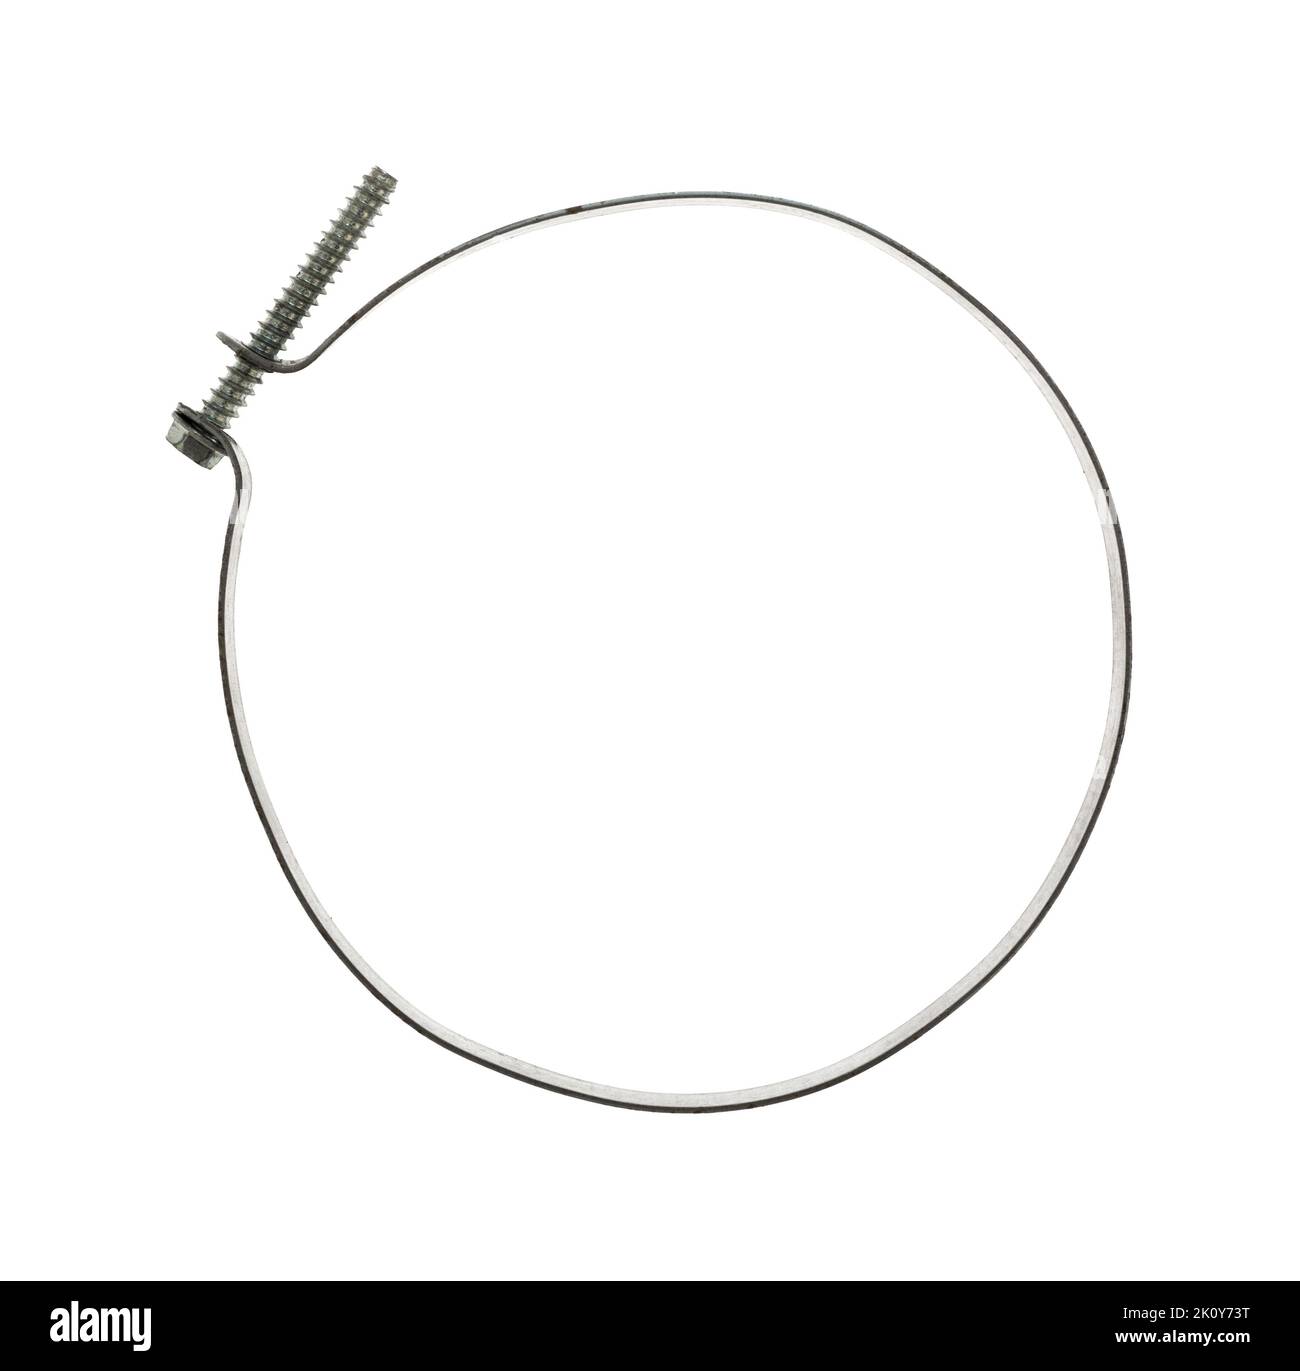 Overhead view of an old circle clamp isolated on a white background. Stock Photo